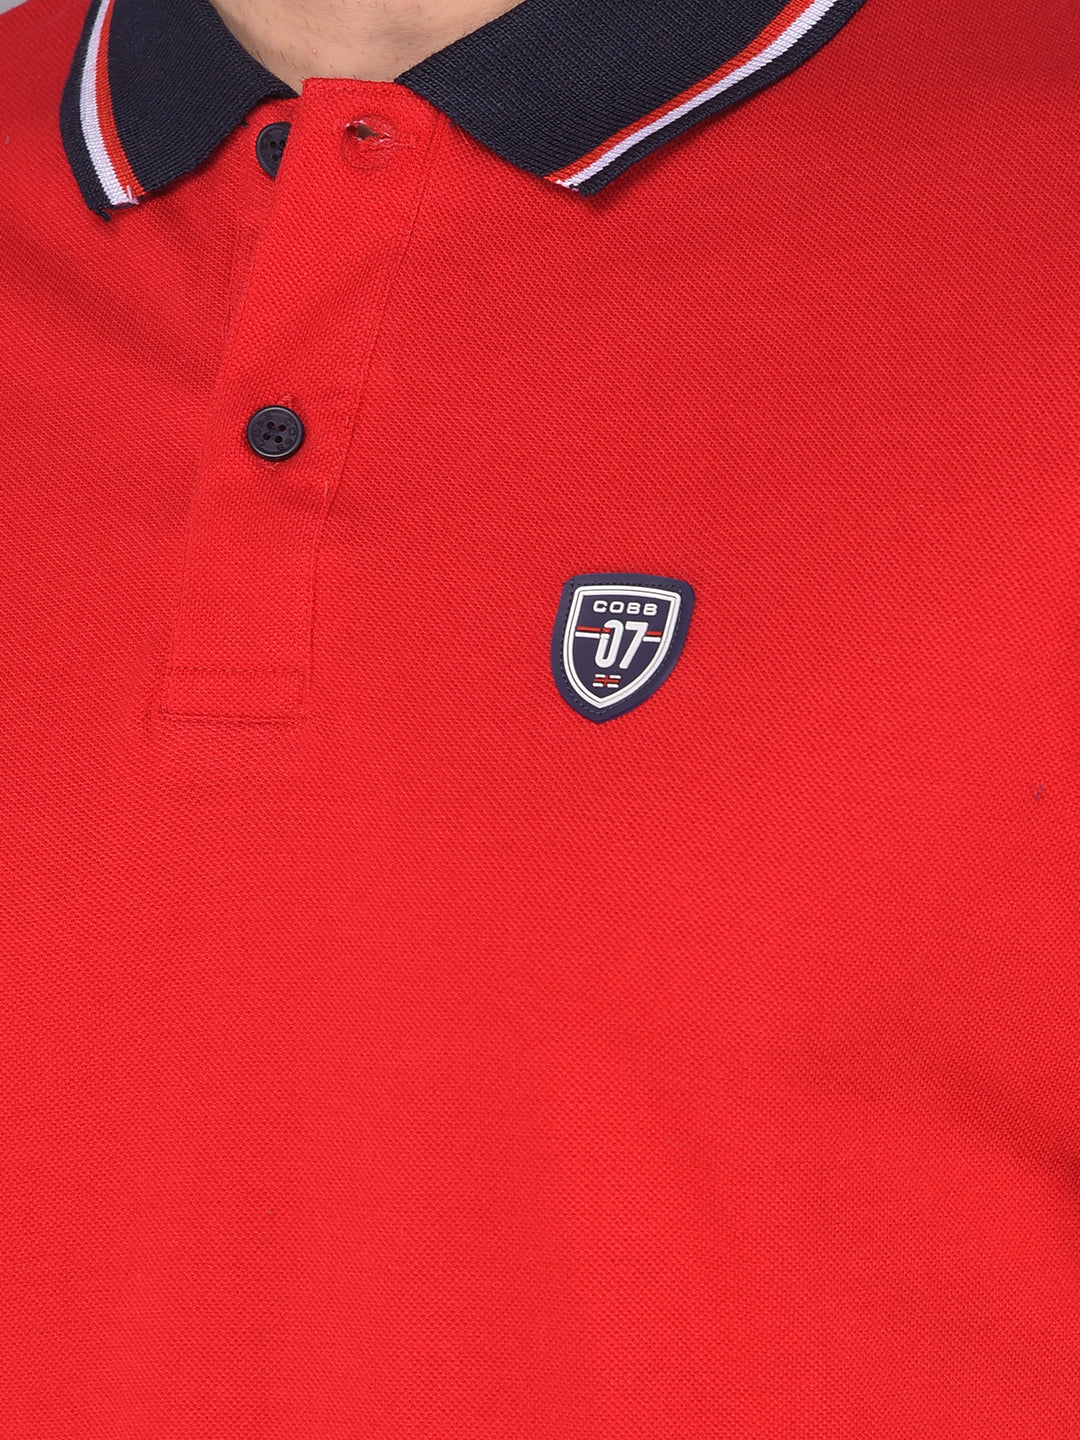 COBB SOLID RED POLO NECK T-SHIRT